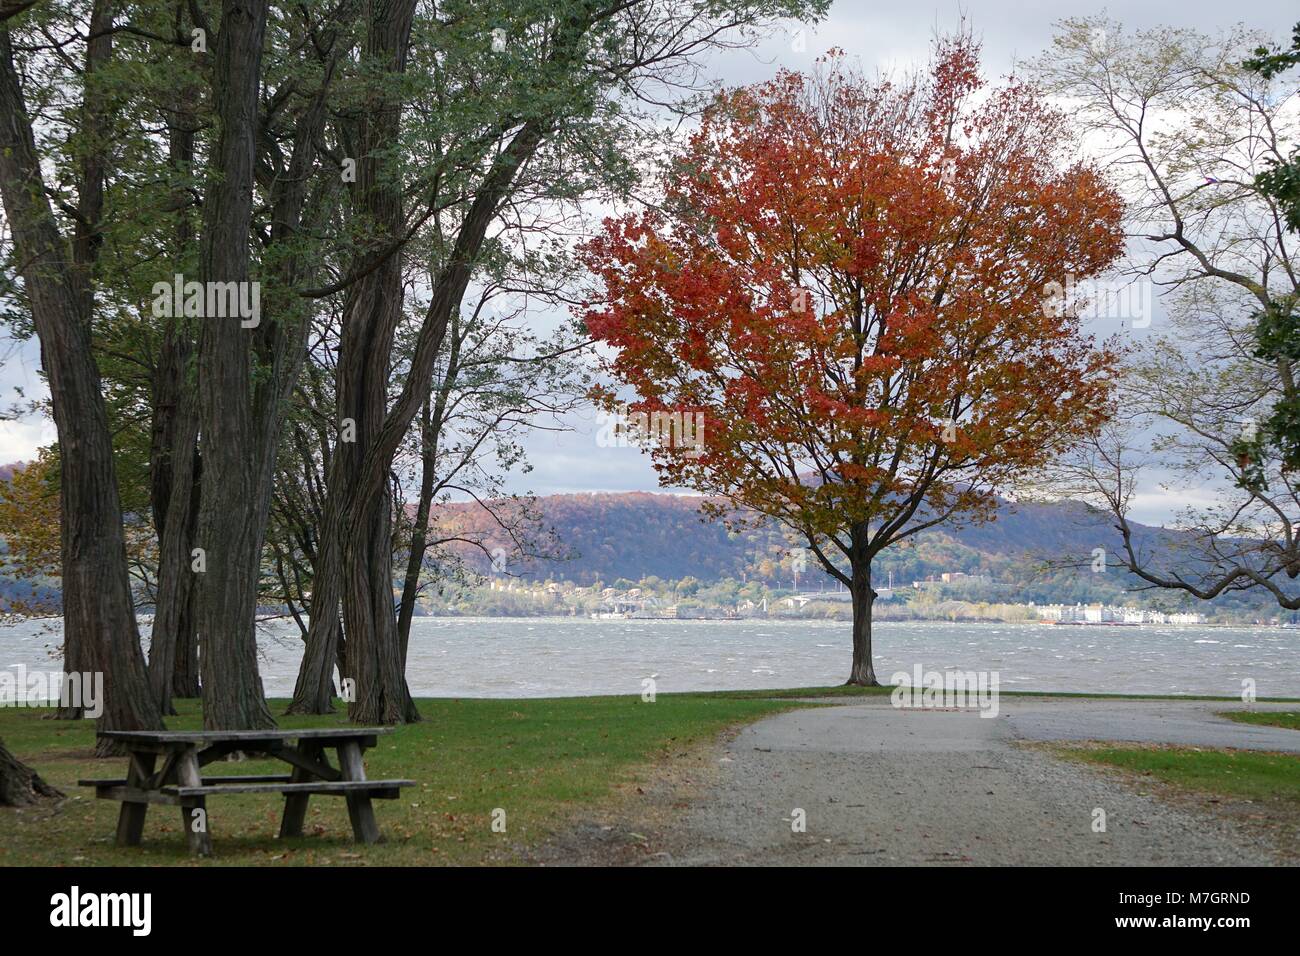 Croton Point Park, Westchester, New York, US: Red maple (Acer rubrum) -- also known as swamp, water, or soft maple -- at the edge of the Hudson River. Stock Photo